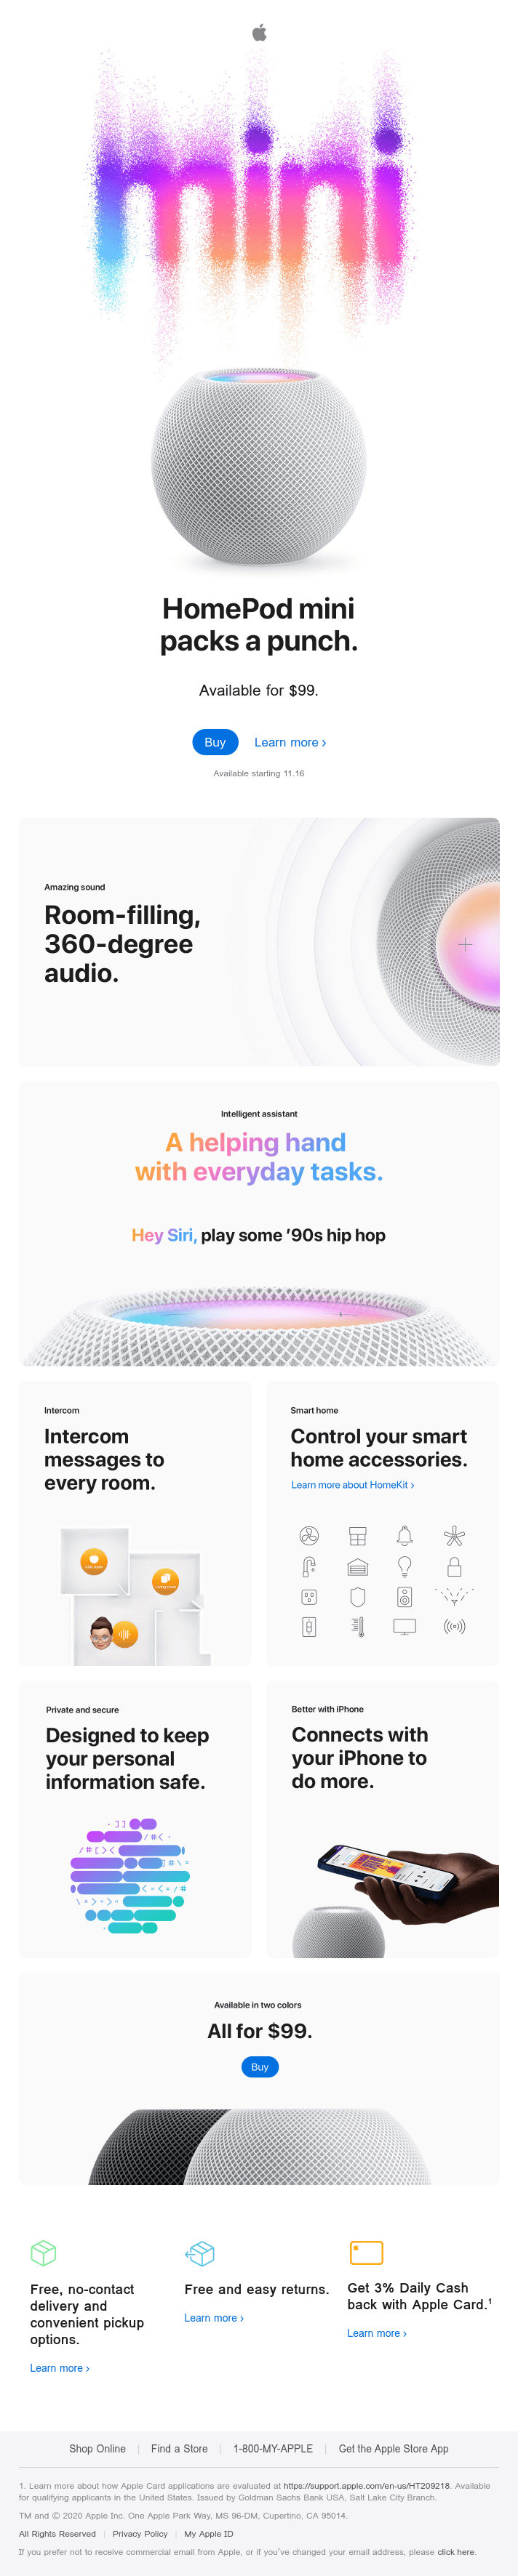 Get big sound from HomePod mini for $99. - Apple Email Newsletter